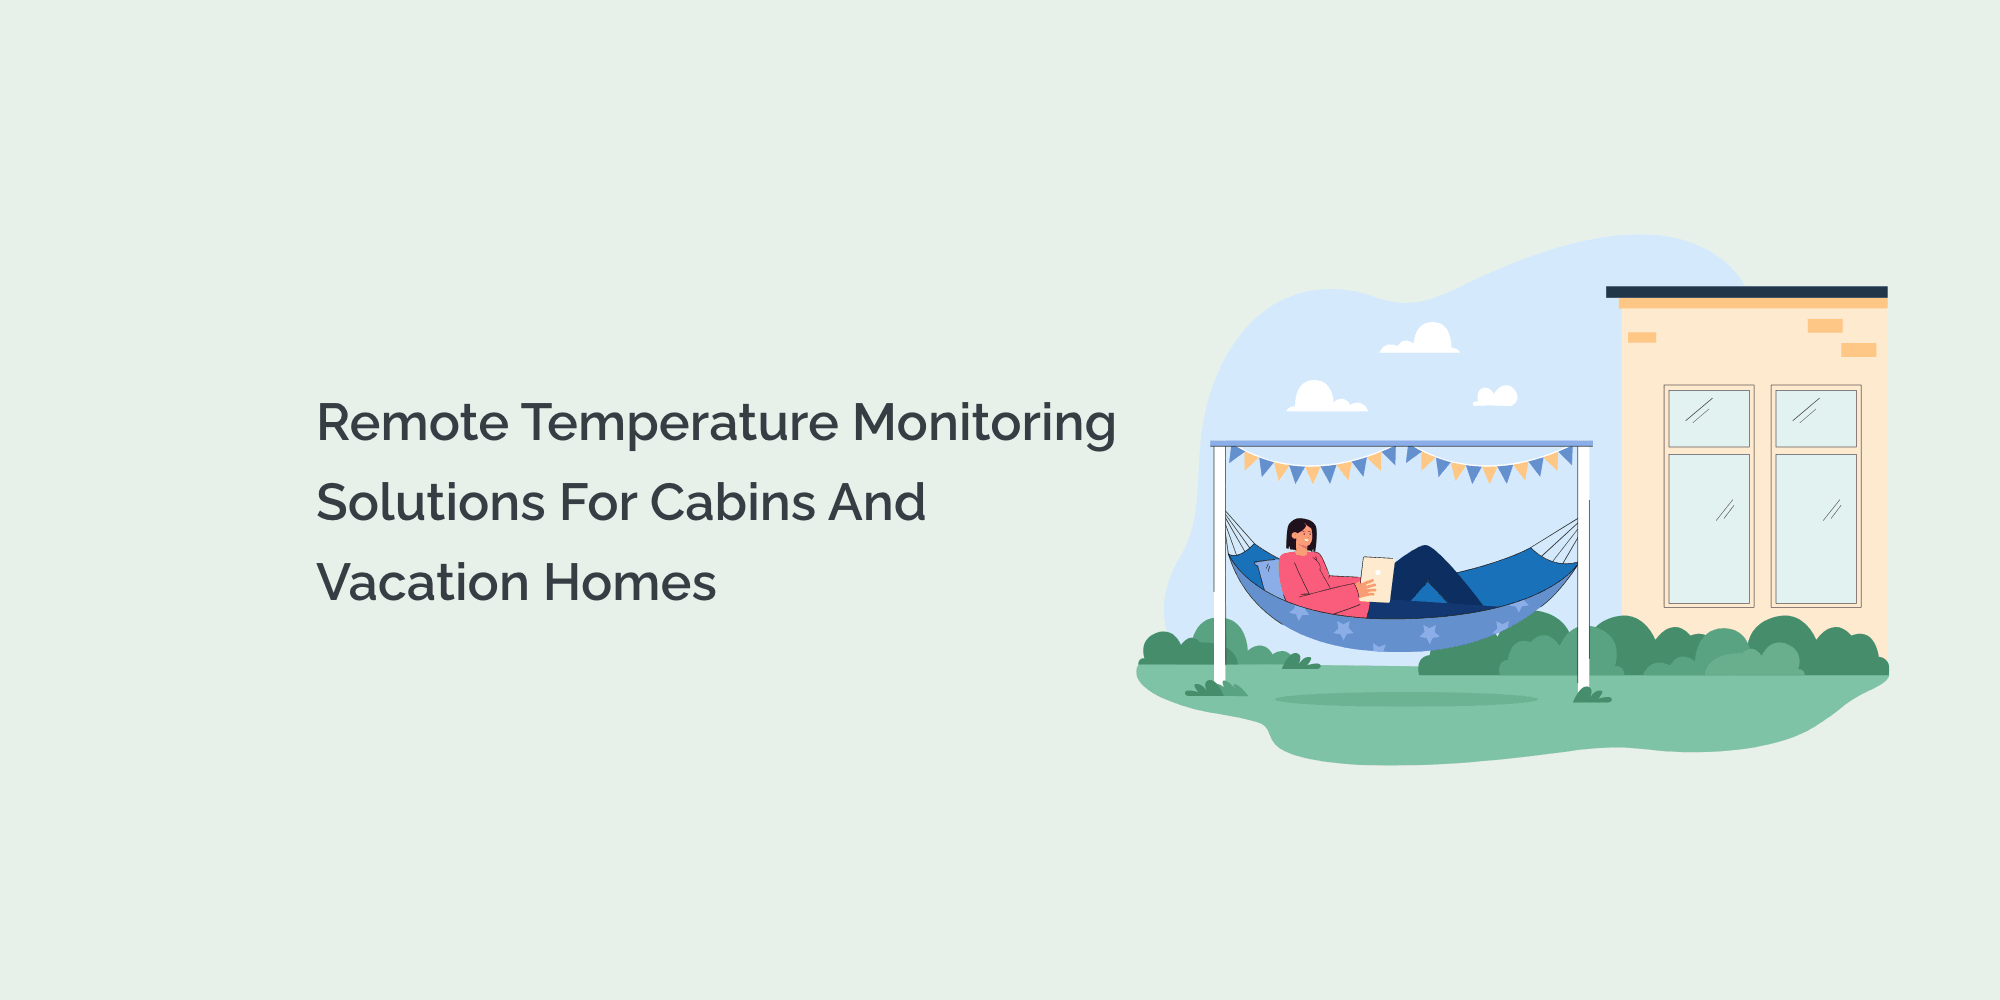 Remote Temperature Monitoring Solutions for Cabins and Vacation Homes